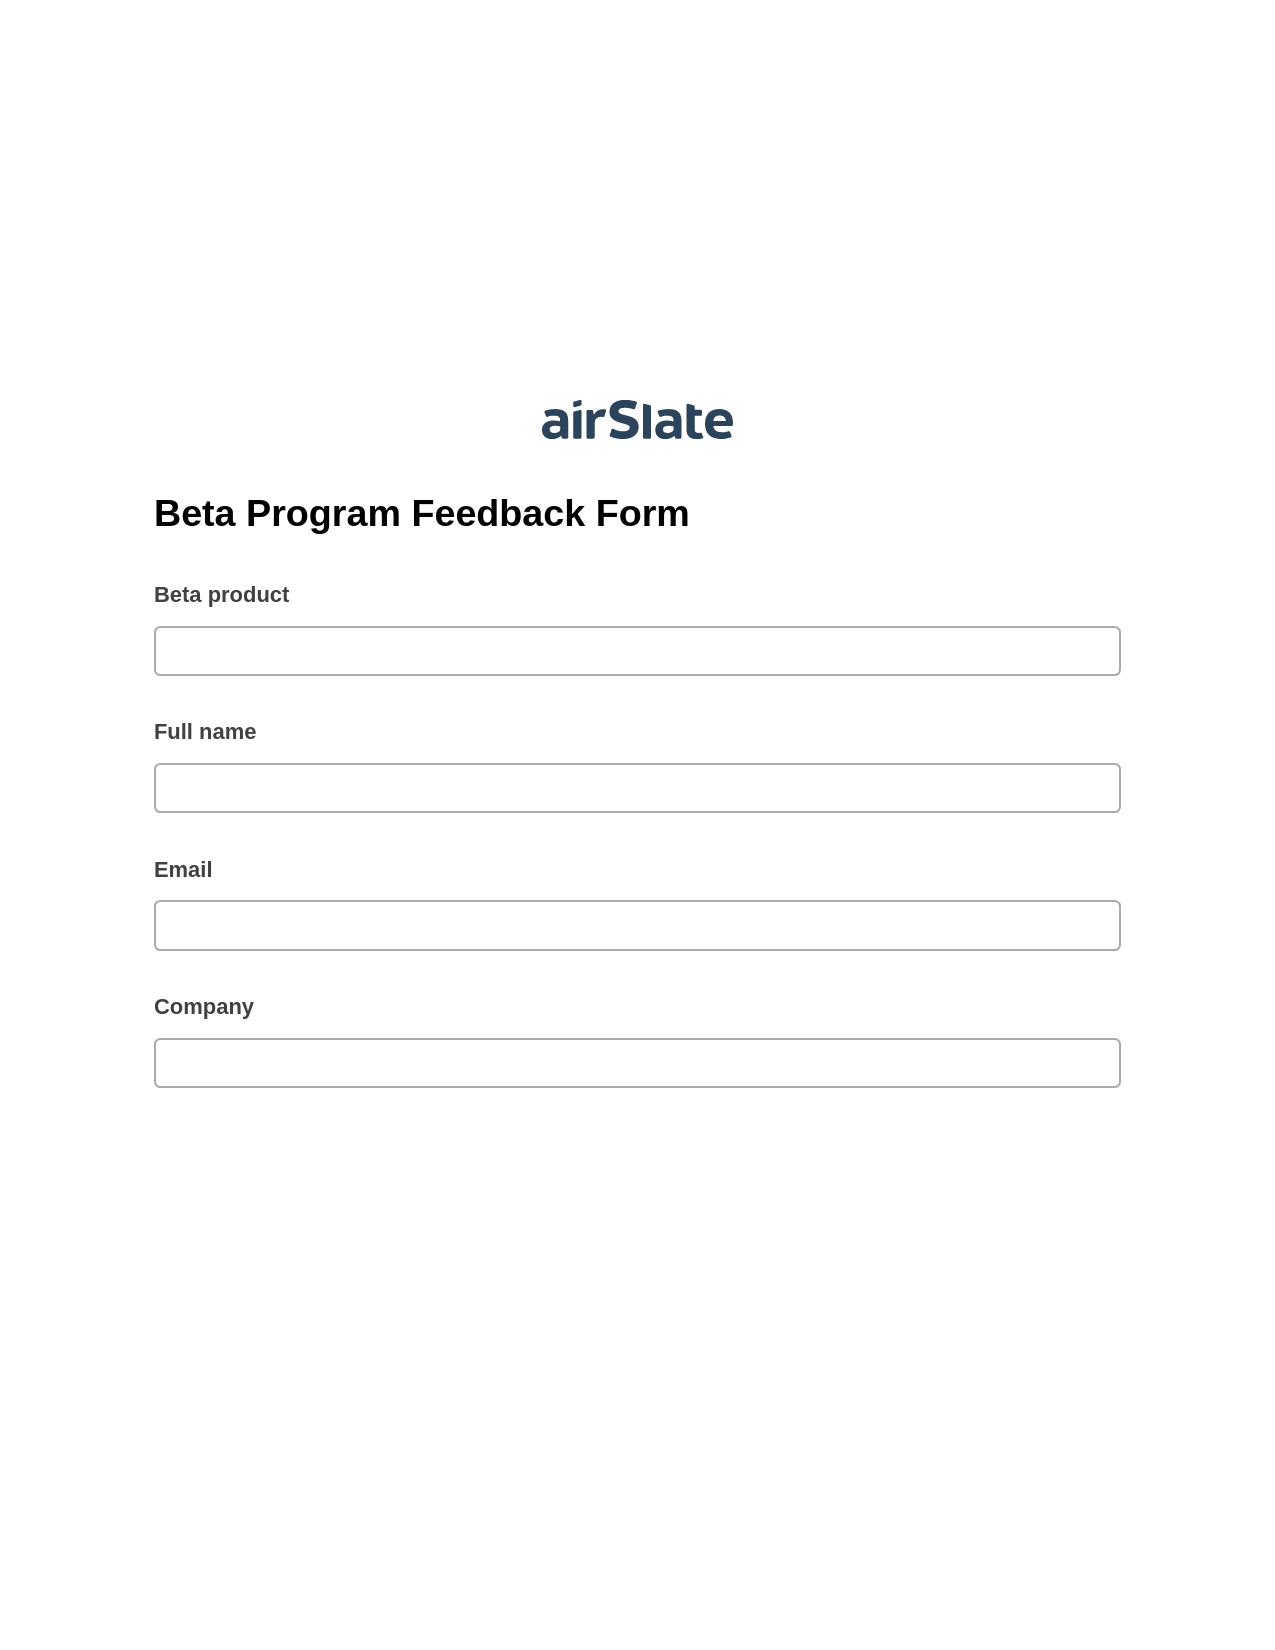 Beta Program Feedback Form Pre-fill from NetSuite Records Bot, Open as Role Bot, Export to Google Sheet Bot